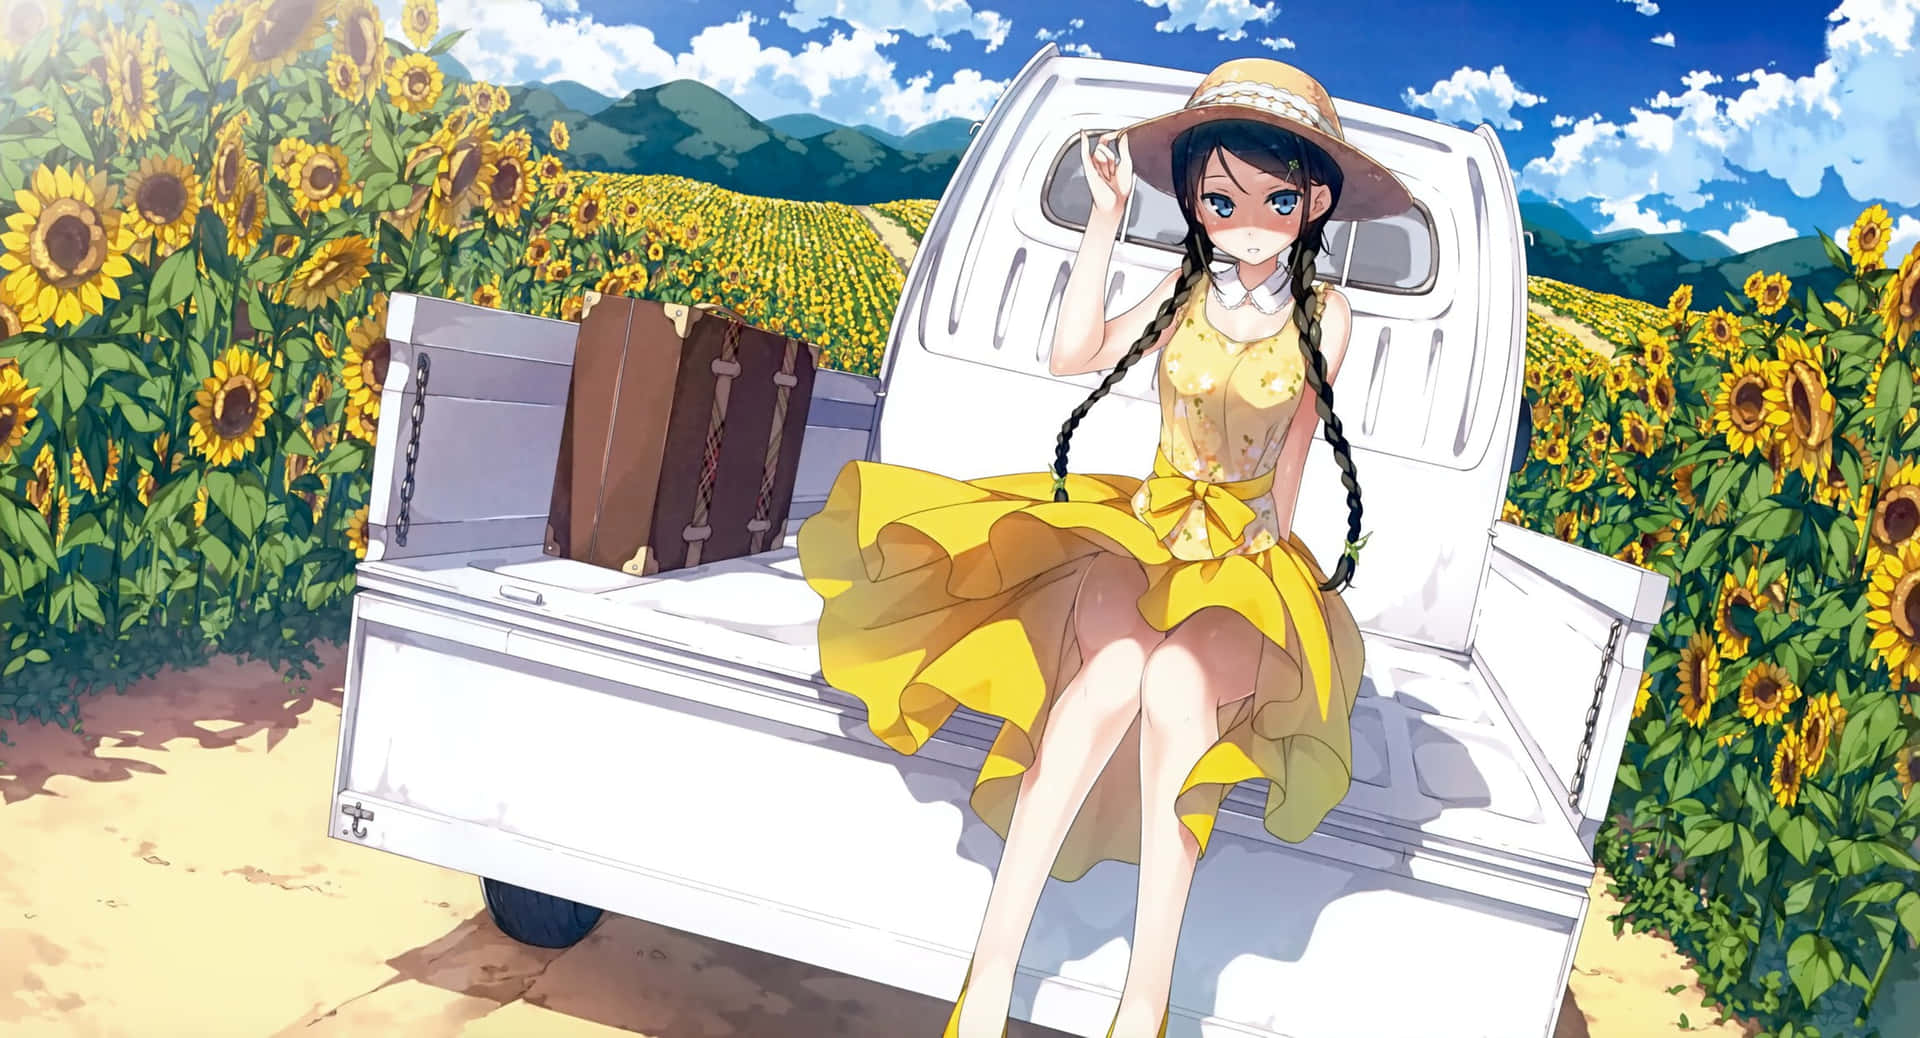 a girl in a yellow dress sitting in a truck in a field of sunflowers